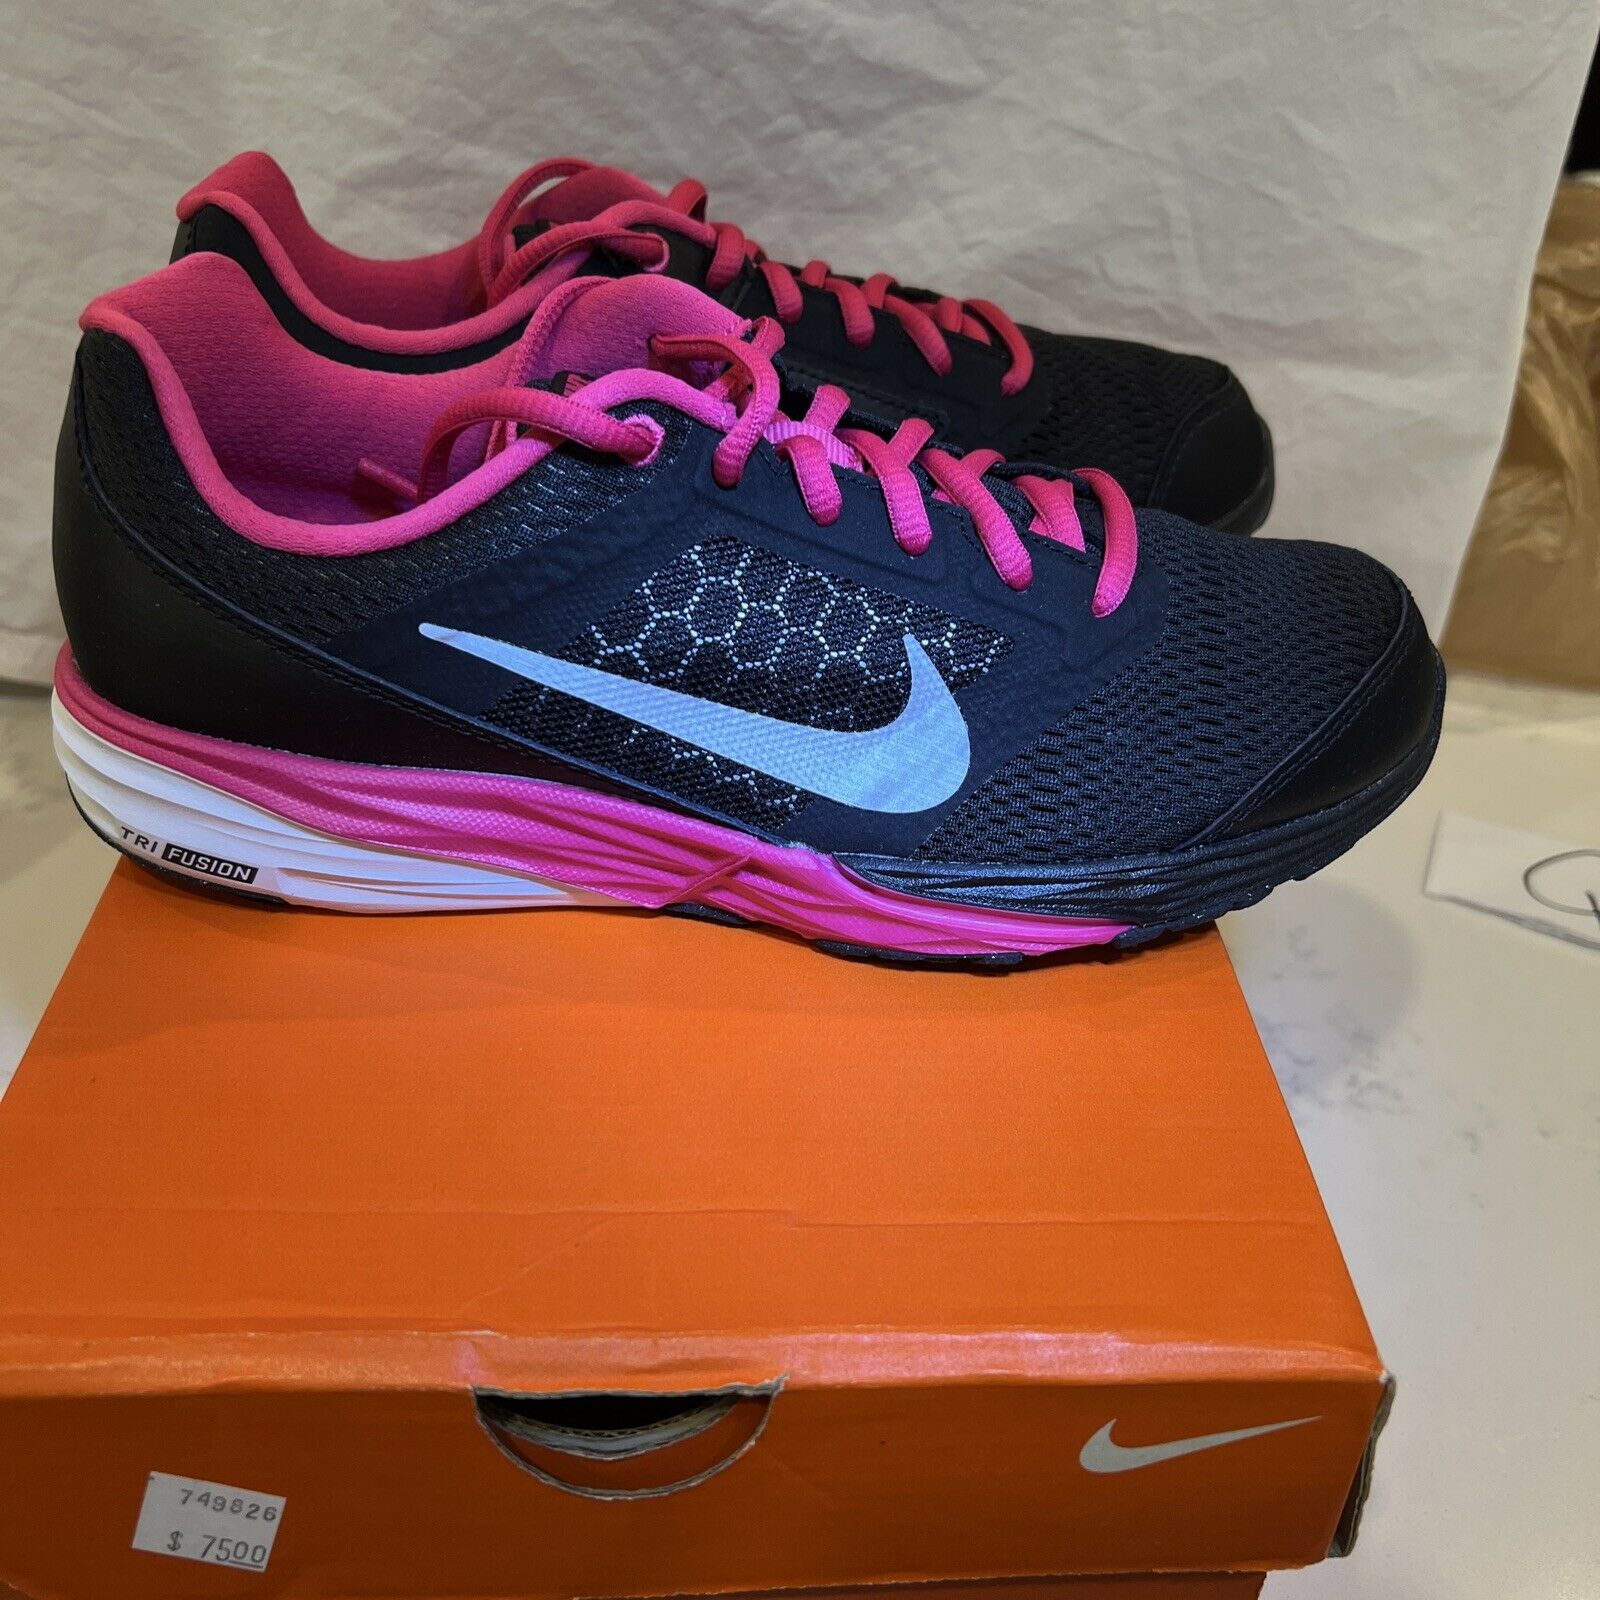 Nike Girls running shoes Size 6Y